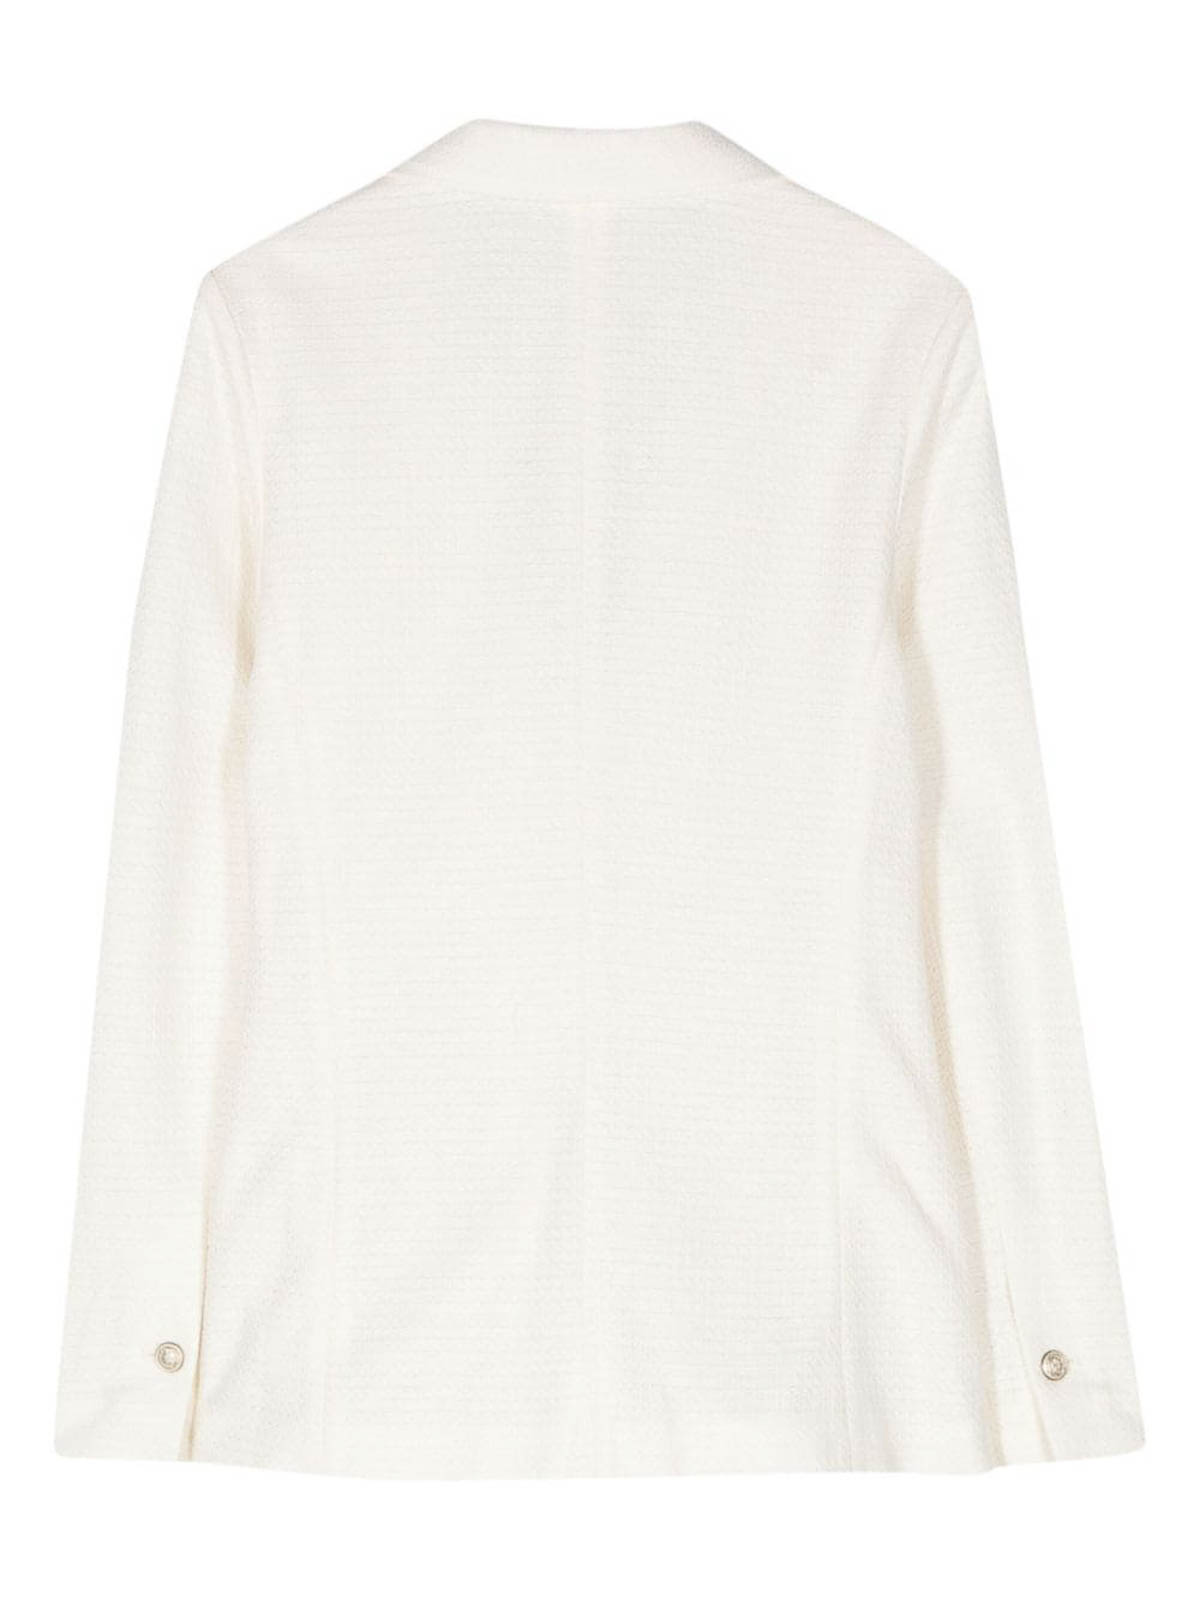 Shop Circolo 1901 Linen And Cotton Blend Single-breasted Jacket In White